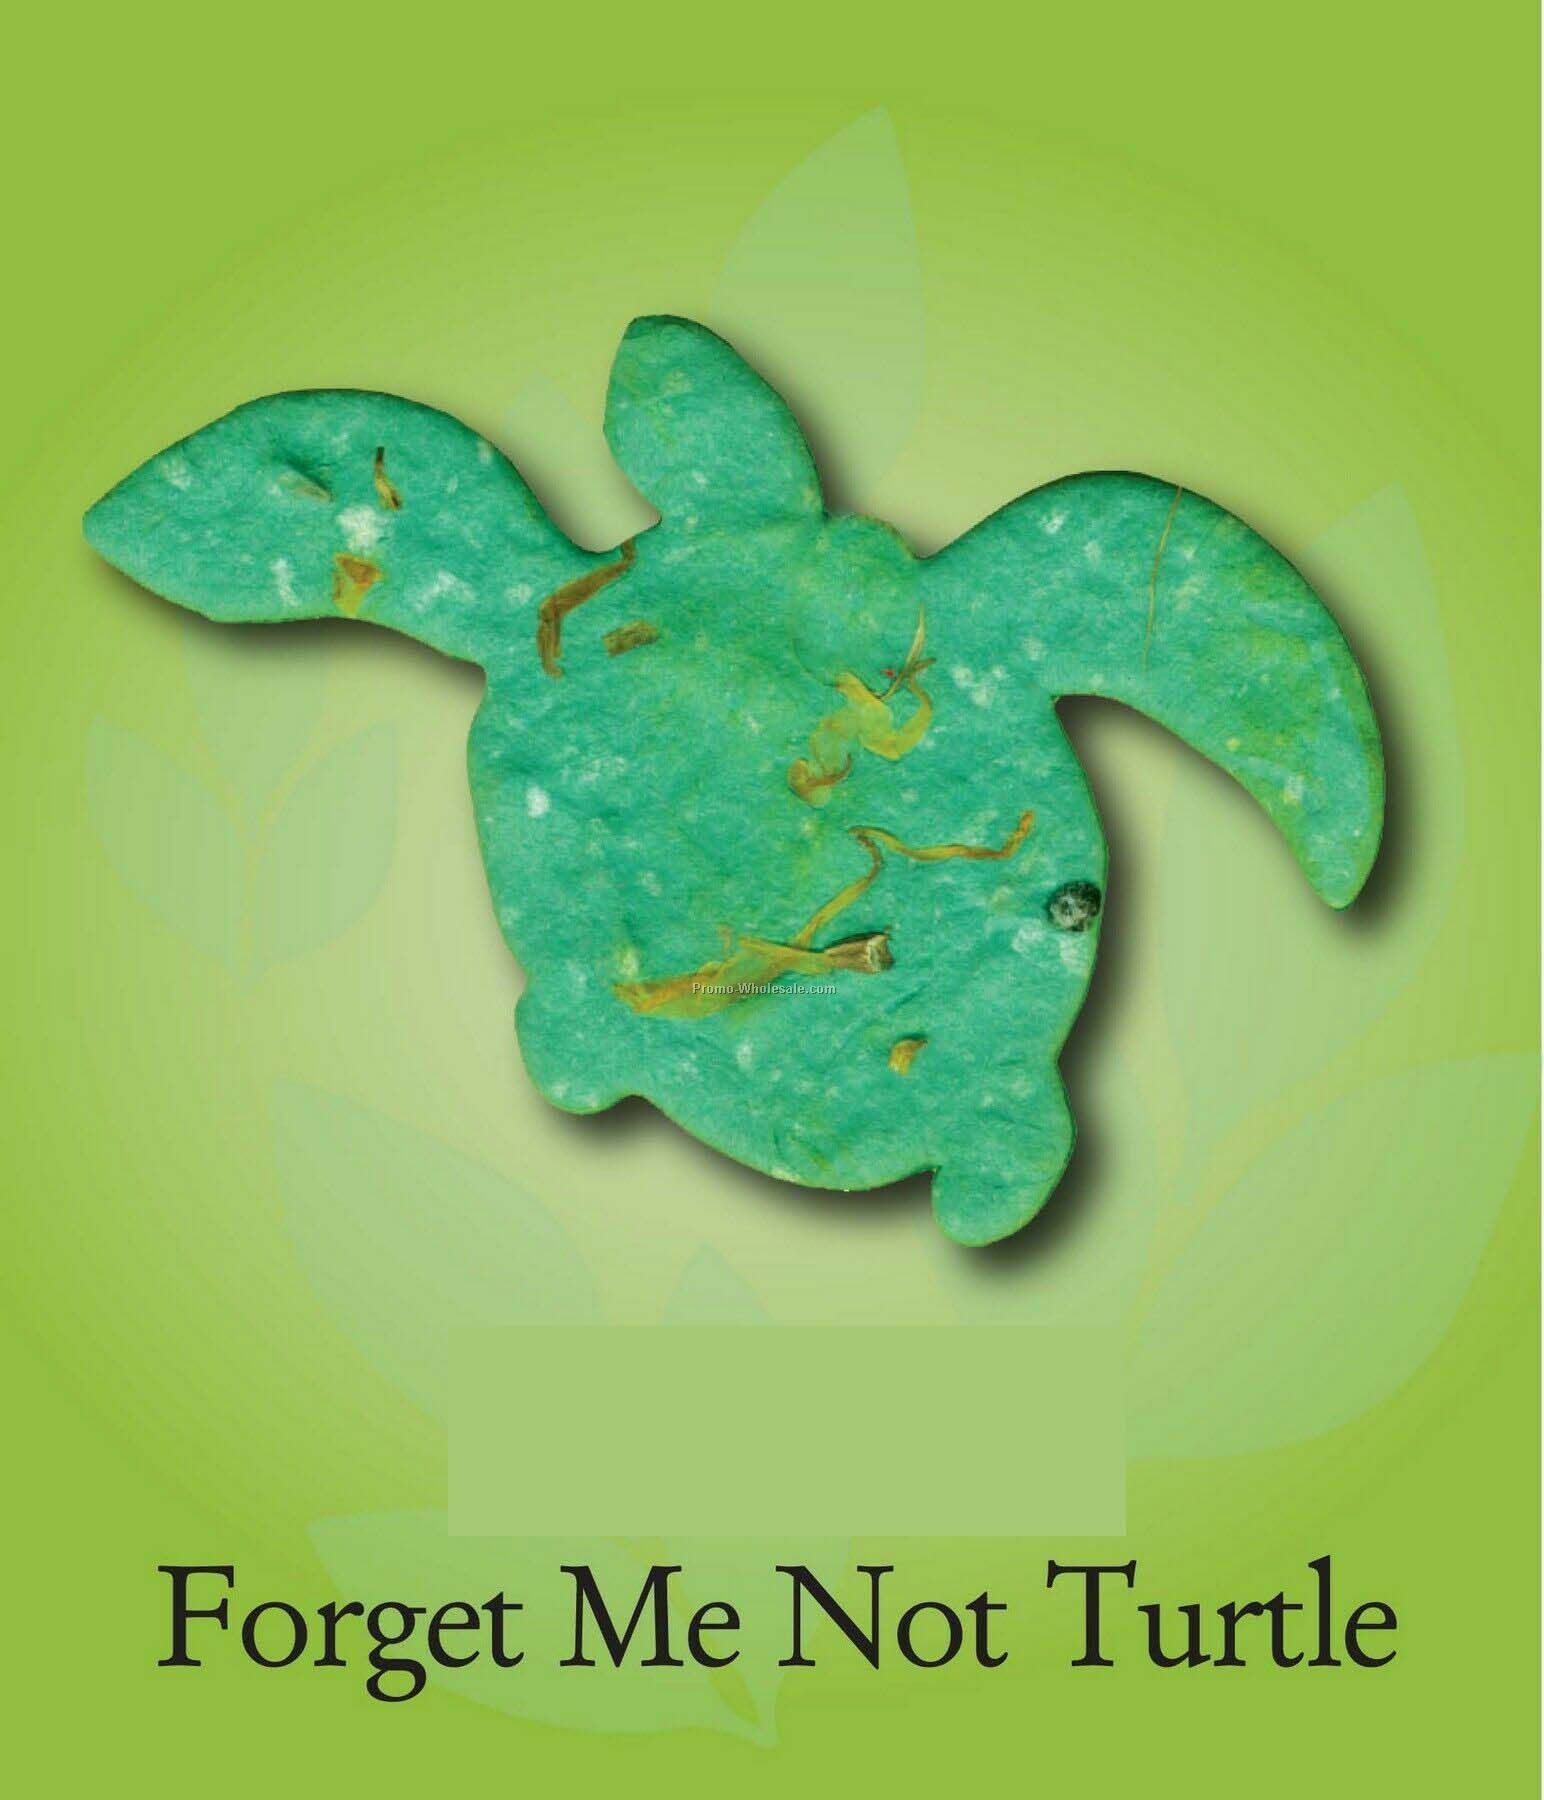 Forget Me Not Turtle W/ Embedded Seed